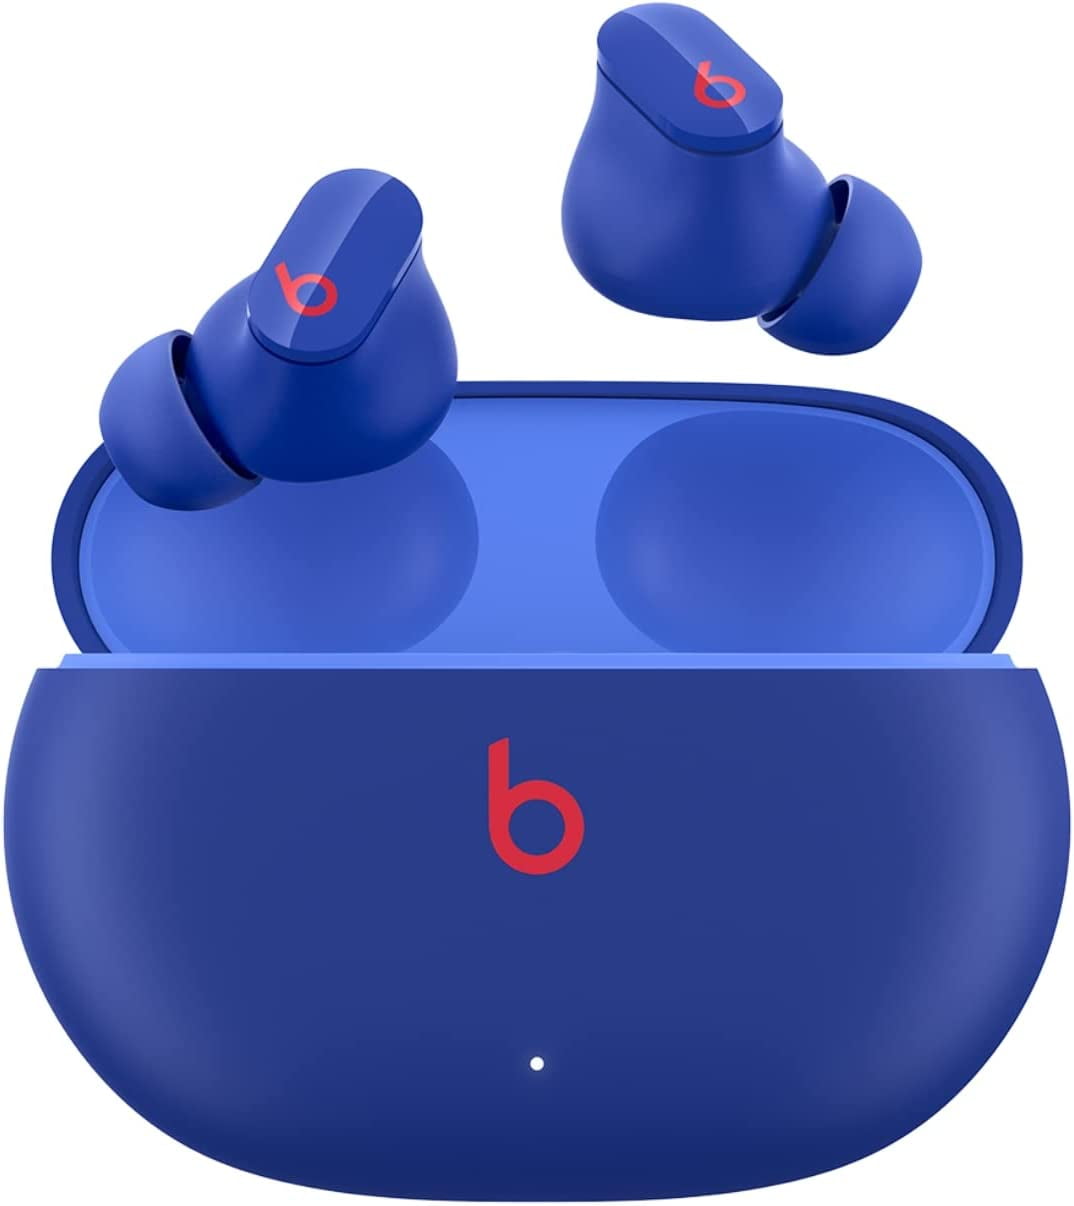 Restored Beats Studio Buds True Wireless Noise Cancelling Earbuds - Class 1 Bluetooth, 8 Hours of Listening Time, Sweat Resistant, Built-In Microphone - (Ocean Blue) (Refurbished)